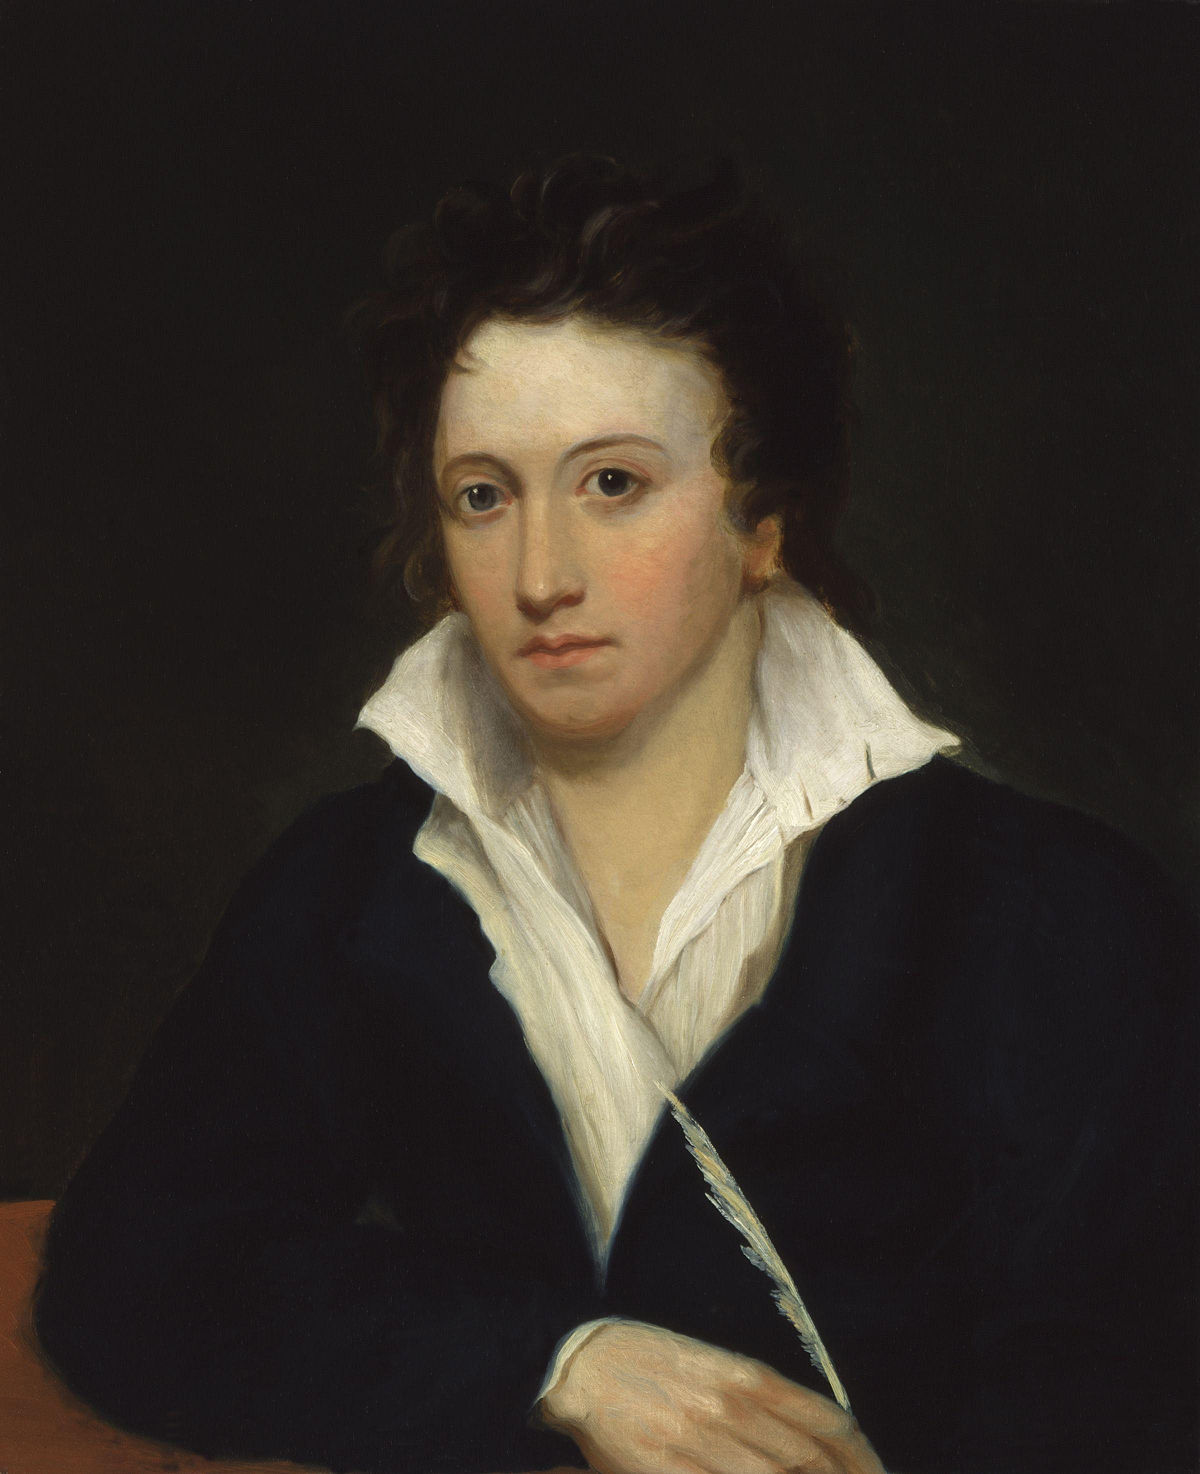 1200px-Percy_Bysshe_Shelley_by_Alfred_Clint.jpg